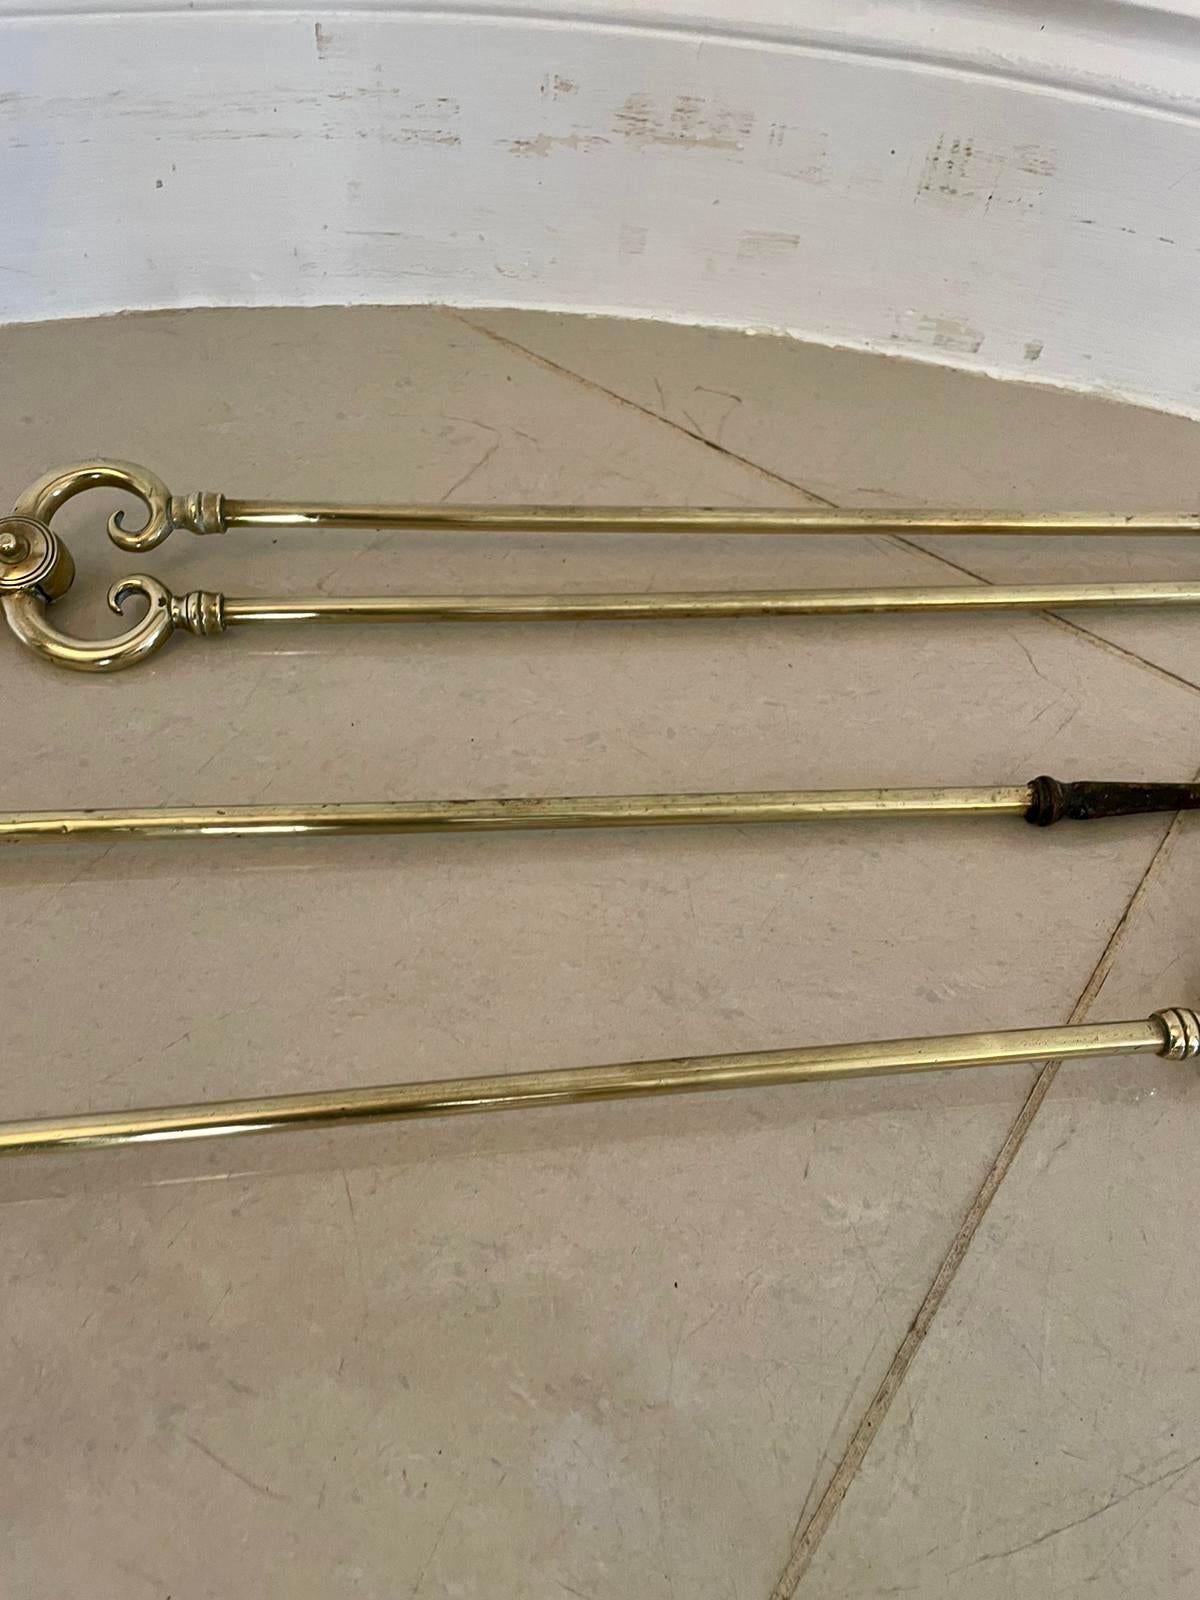 Antique Victorian quality set of 3 brass fire irons consisting of a shovel, poker and fire tongs 

H 67.5 x W 11.5 x D 3 cm
Date 1860
